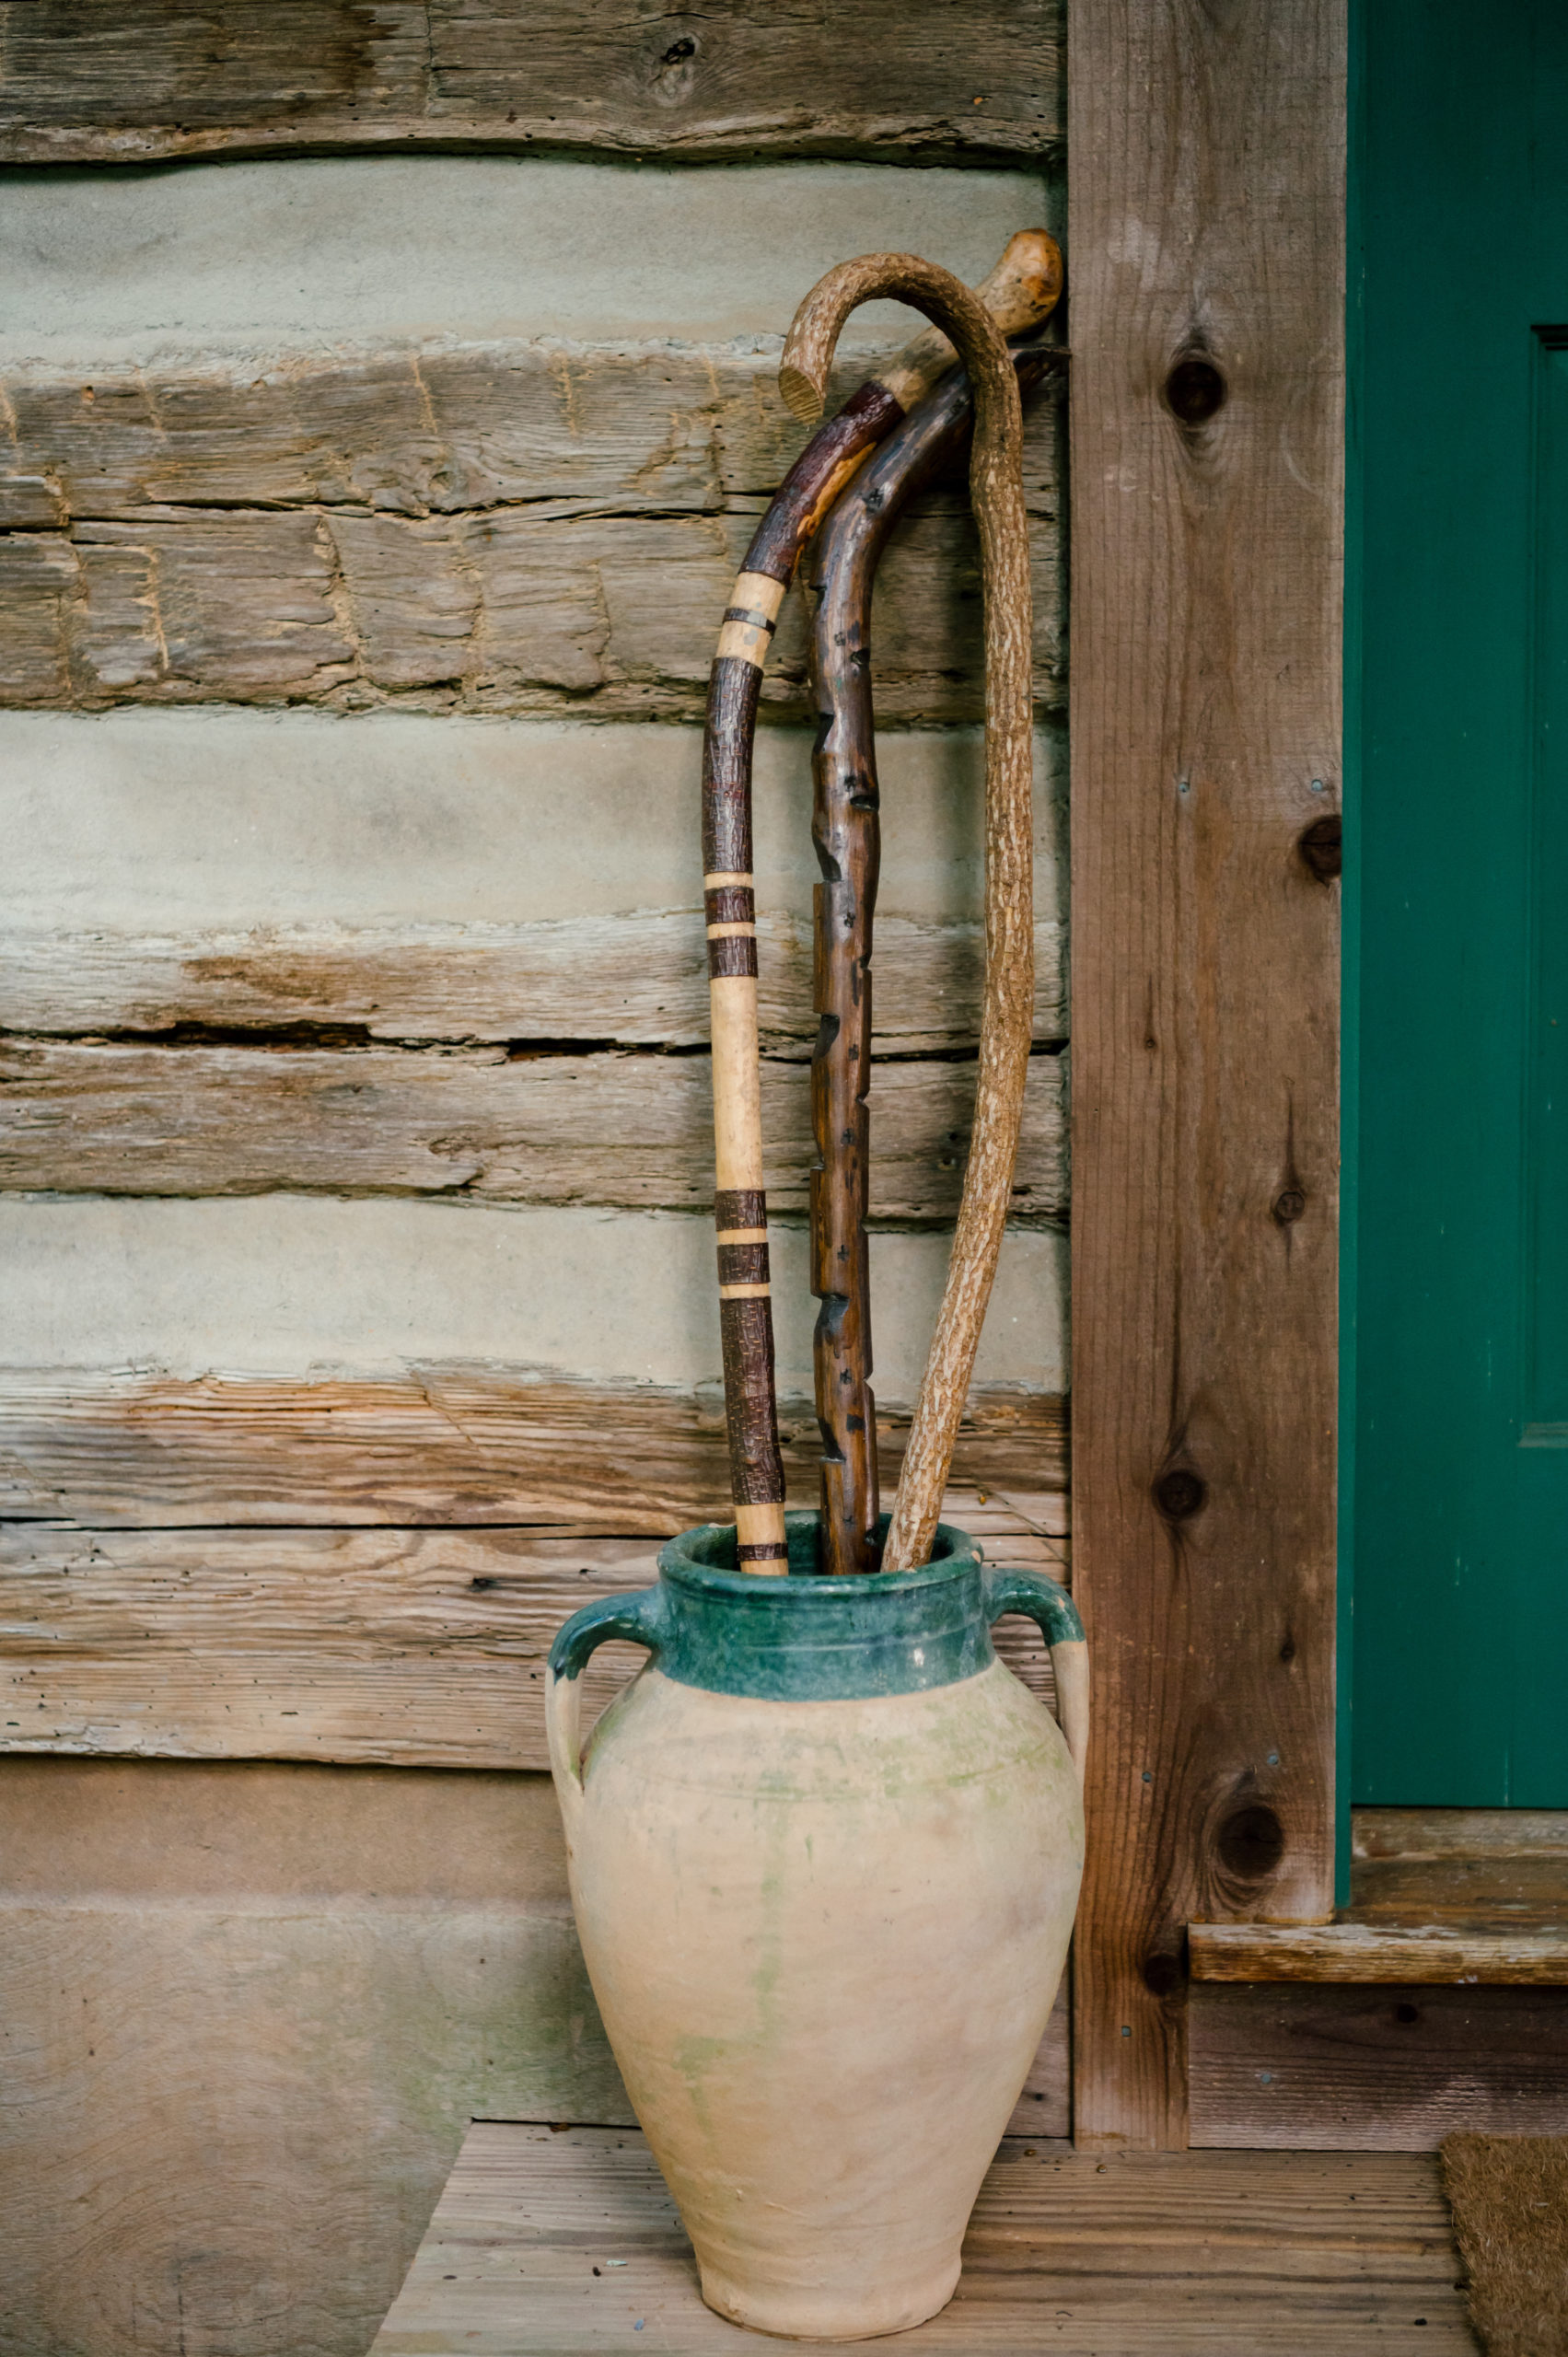 Photo of wooden handle umbrellas in a tall standing tan pot on the front porch of a wood cabin